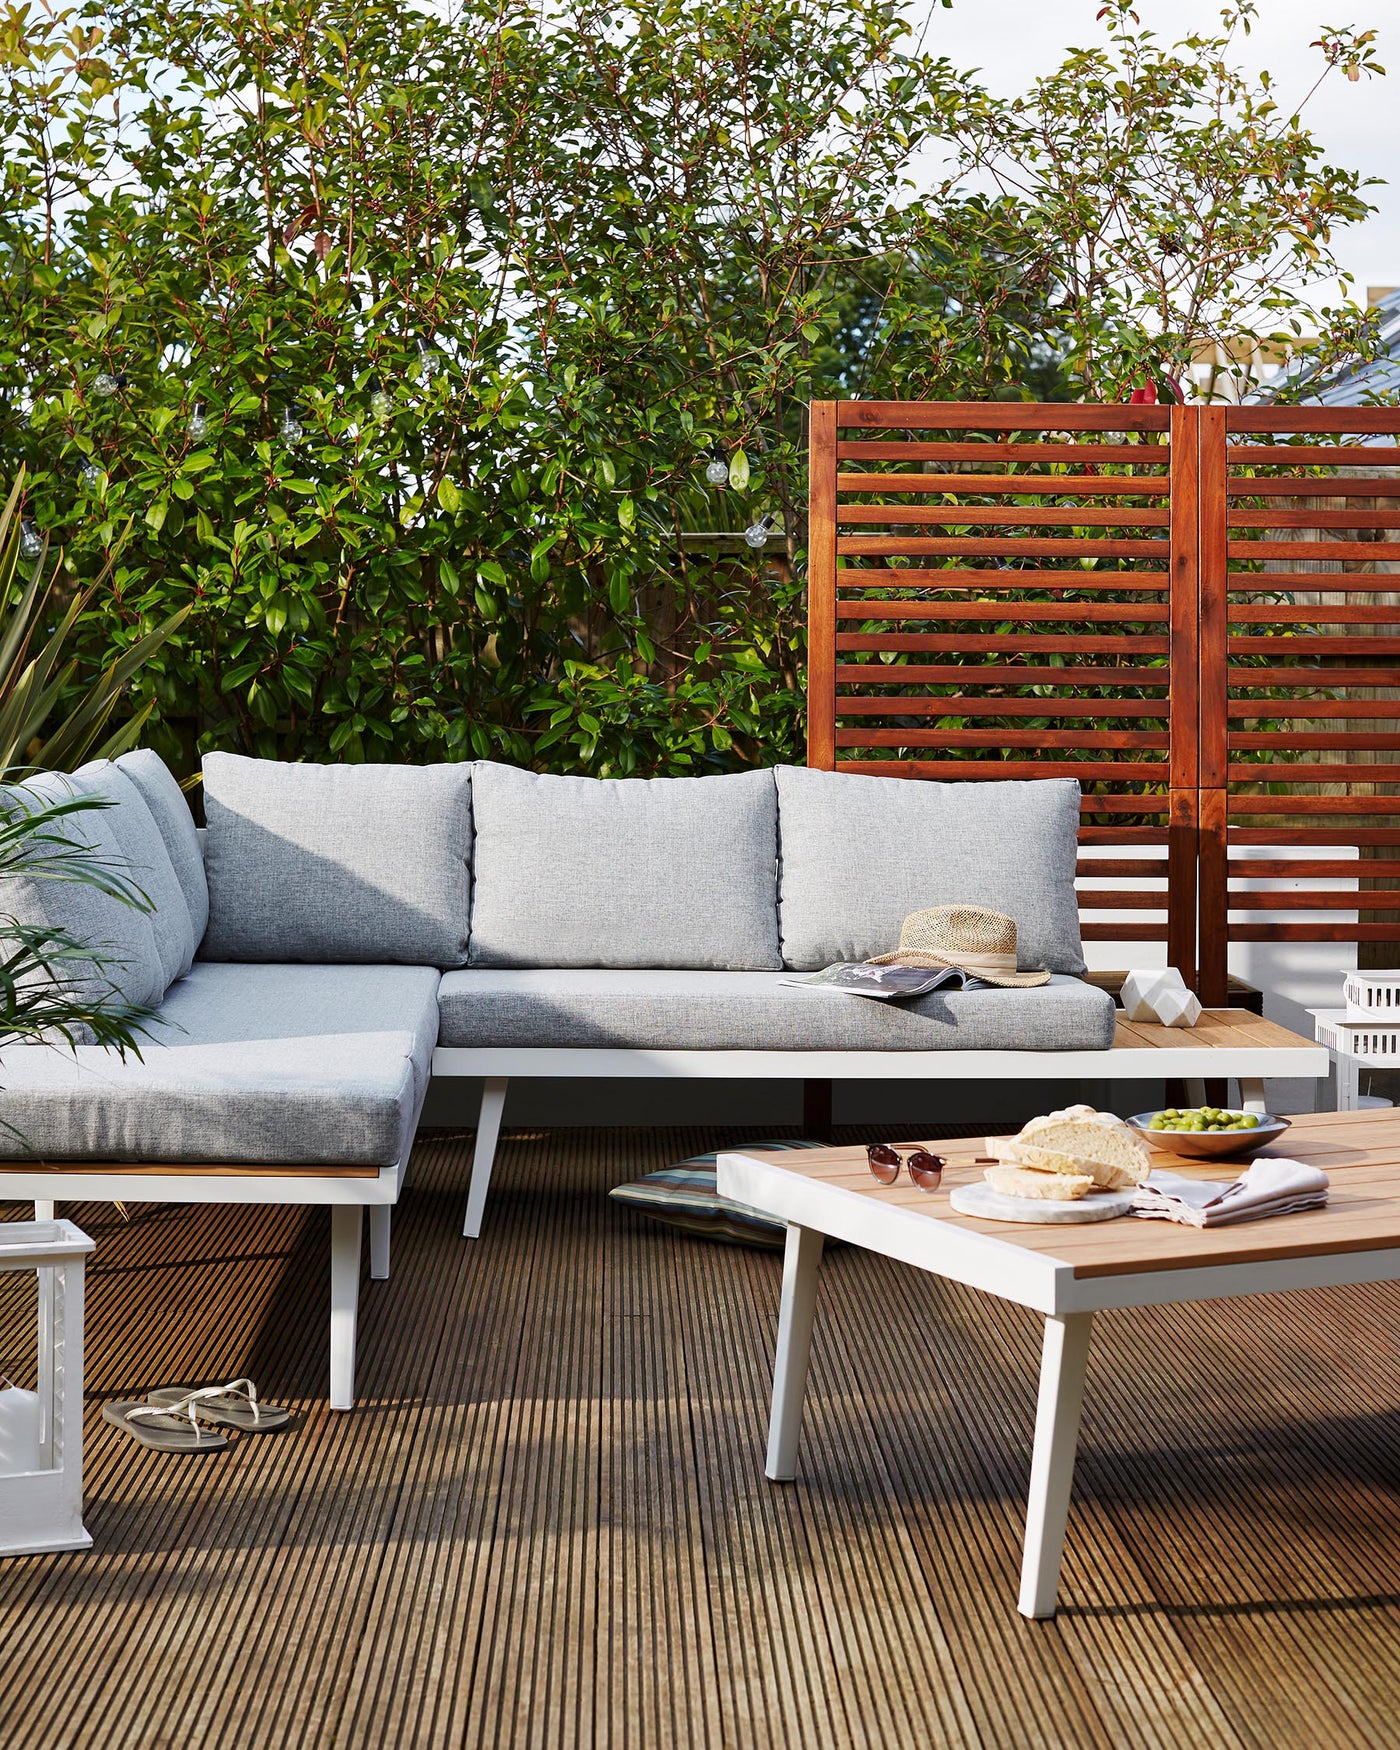 Modern outdoor furniture set featuring a sectional sofa with grey cushions and a white frame, complemented by a two-toned wood and white coffee table. A small white side table is also present, alongside decorative items such as pillows, books, and a straw hat. The set is arranged on a wooden deck with lush greenery in the background, providing a cosy and inviting outdoor living space.